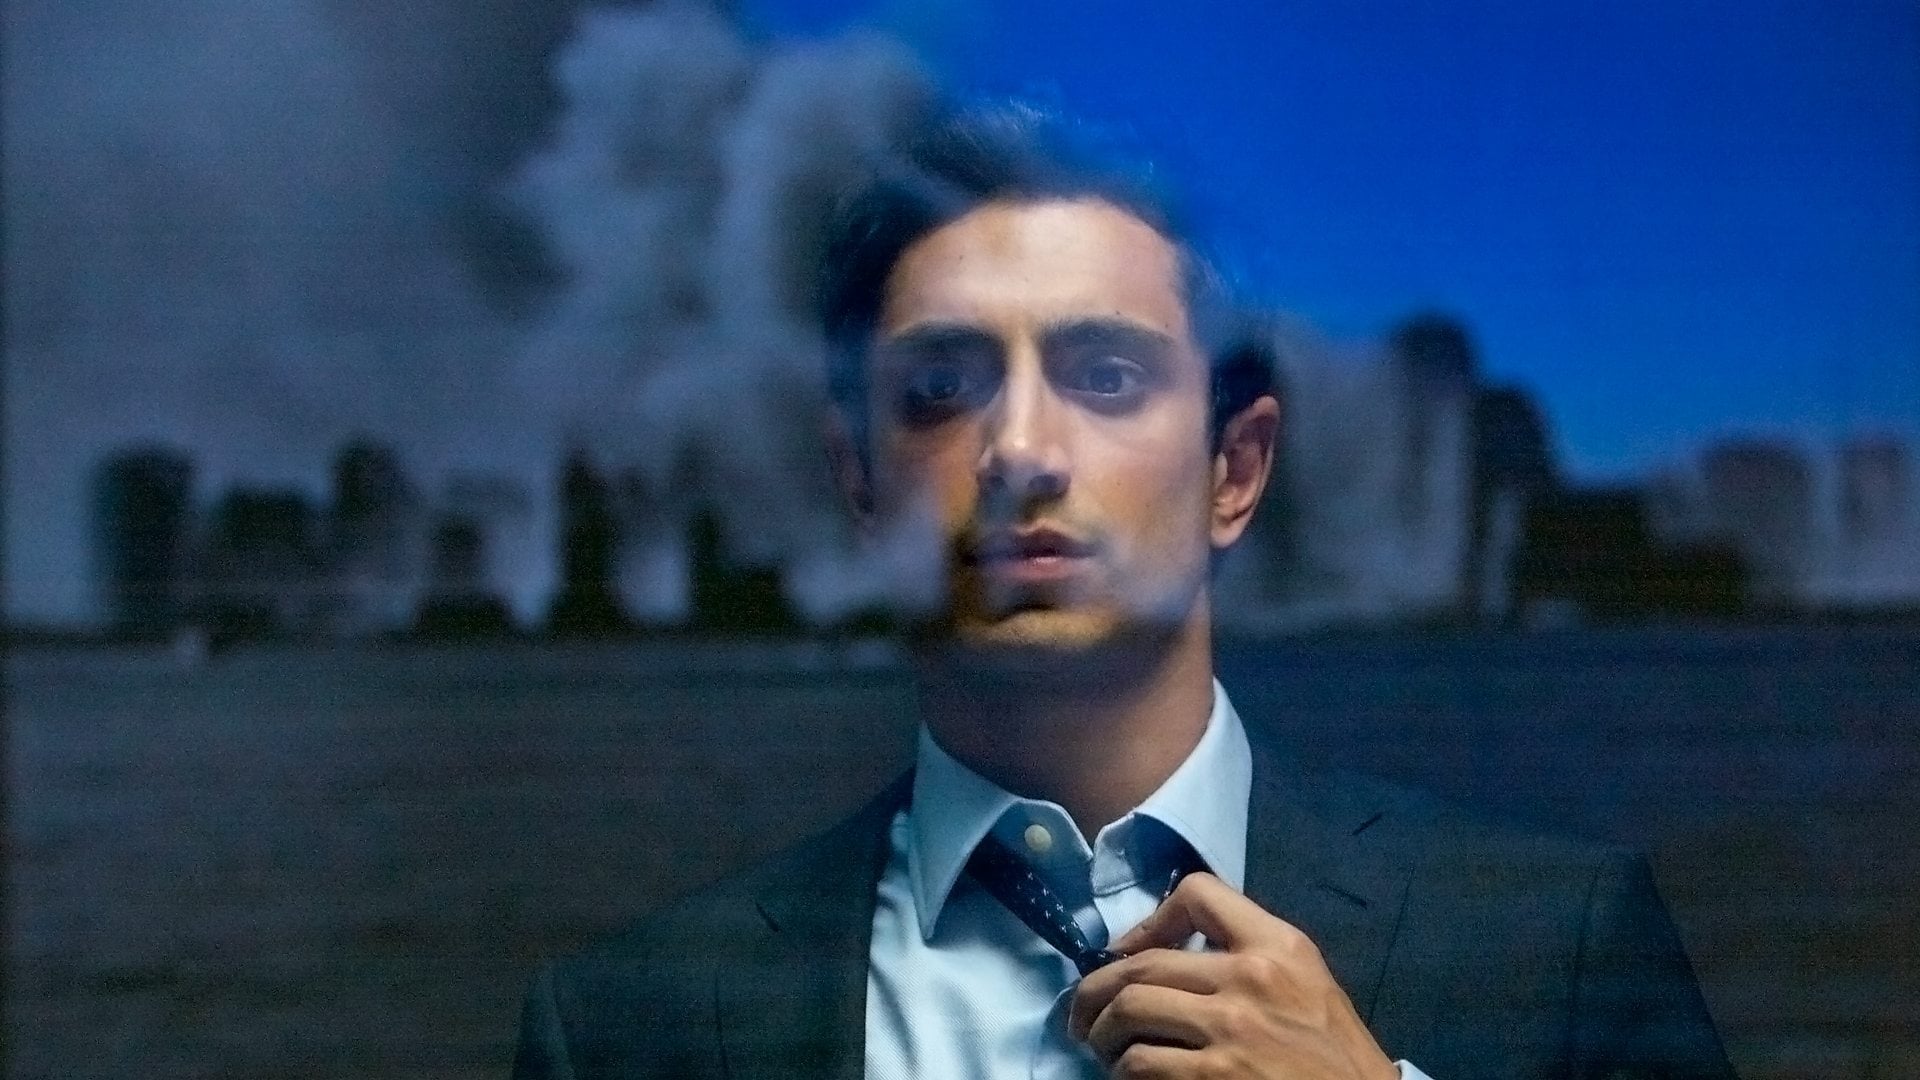 The Reluctant Fundamentalist 2013 123movies